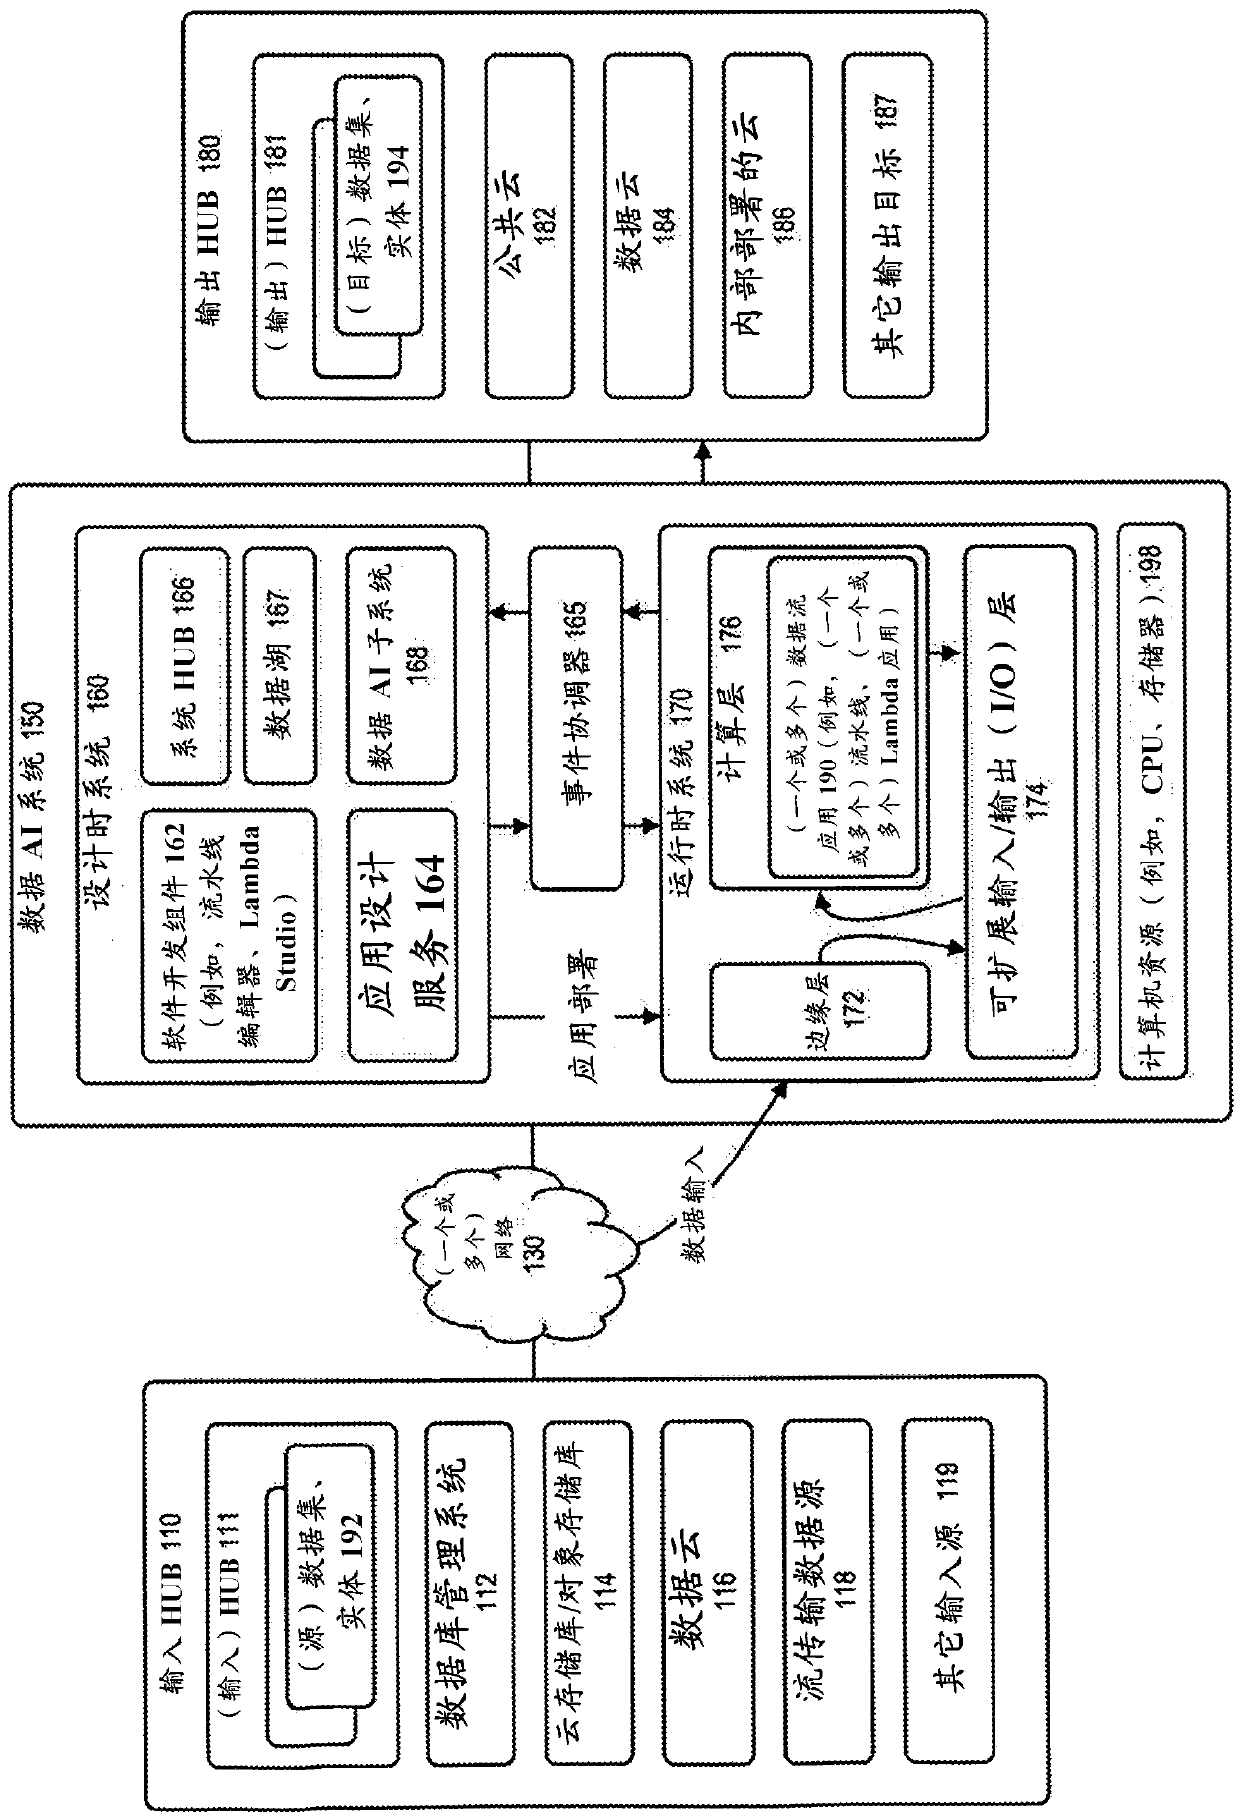 System and method for automated mapping of data types for use with dataflow environments